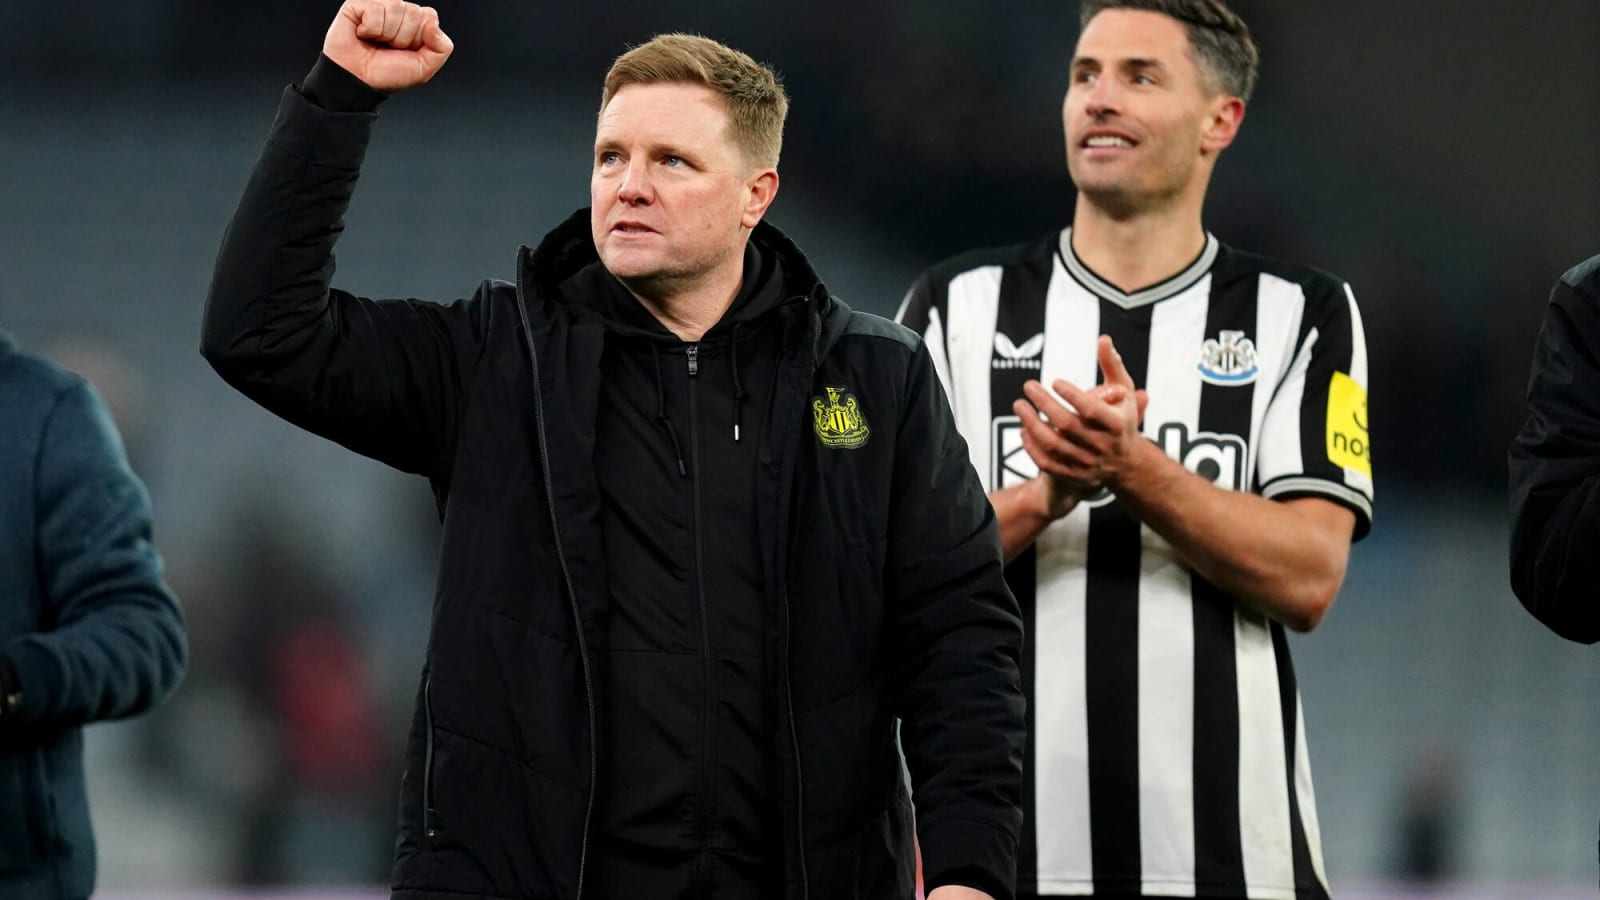 Newcastle’s Premier League squad are two players short of the 25-man limit